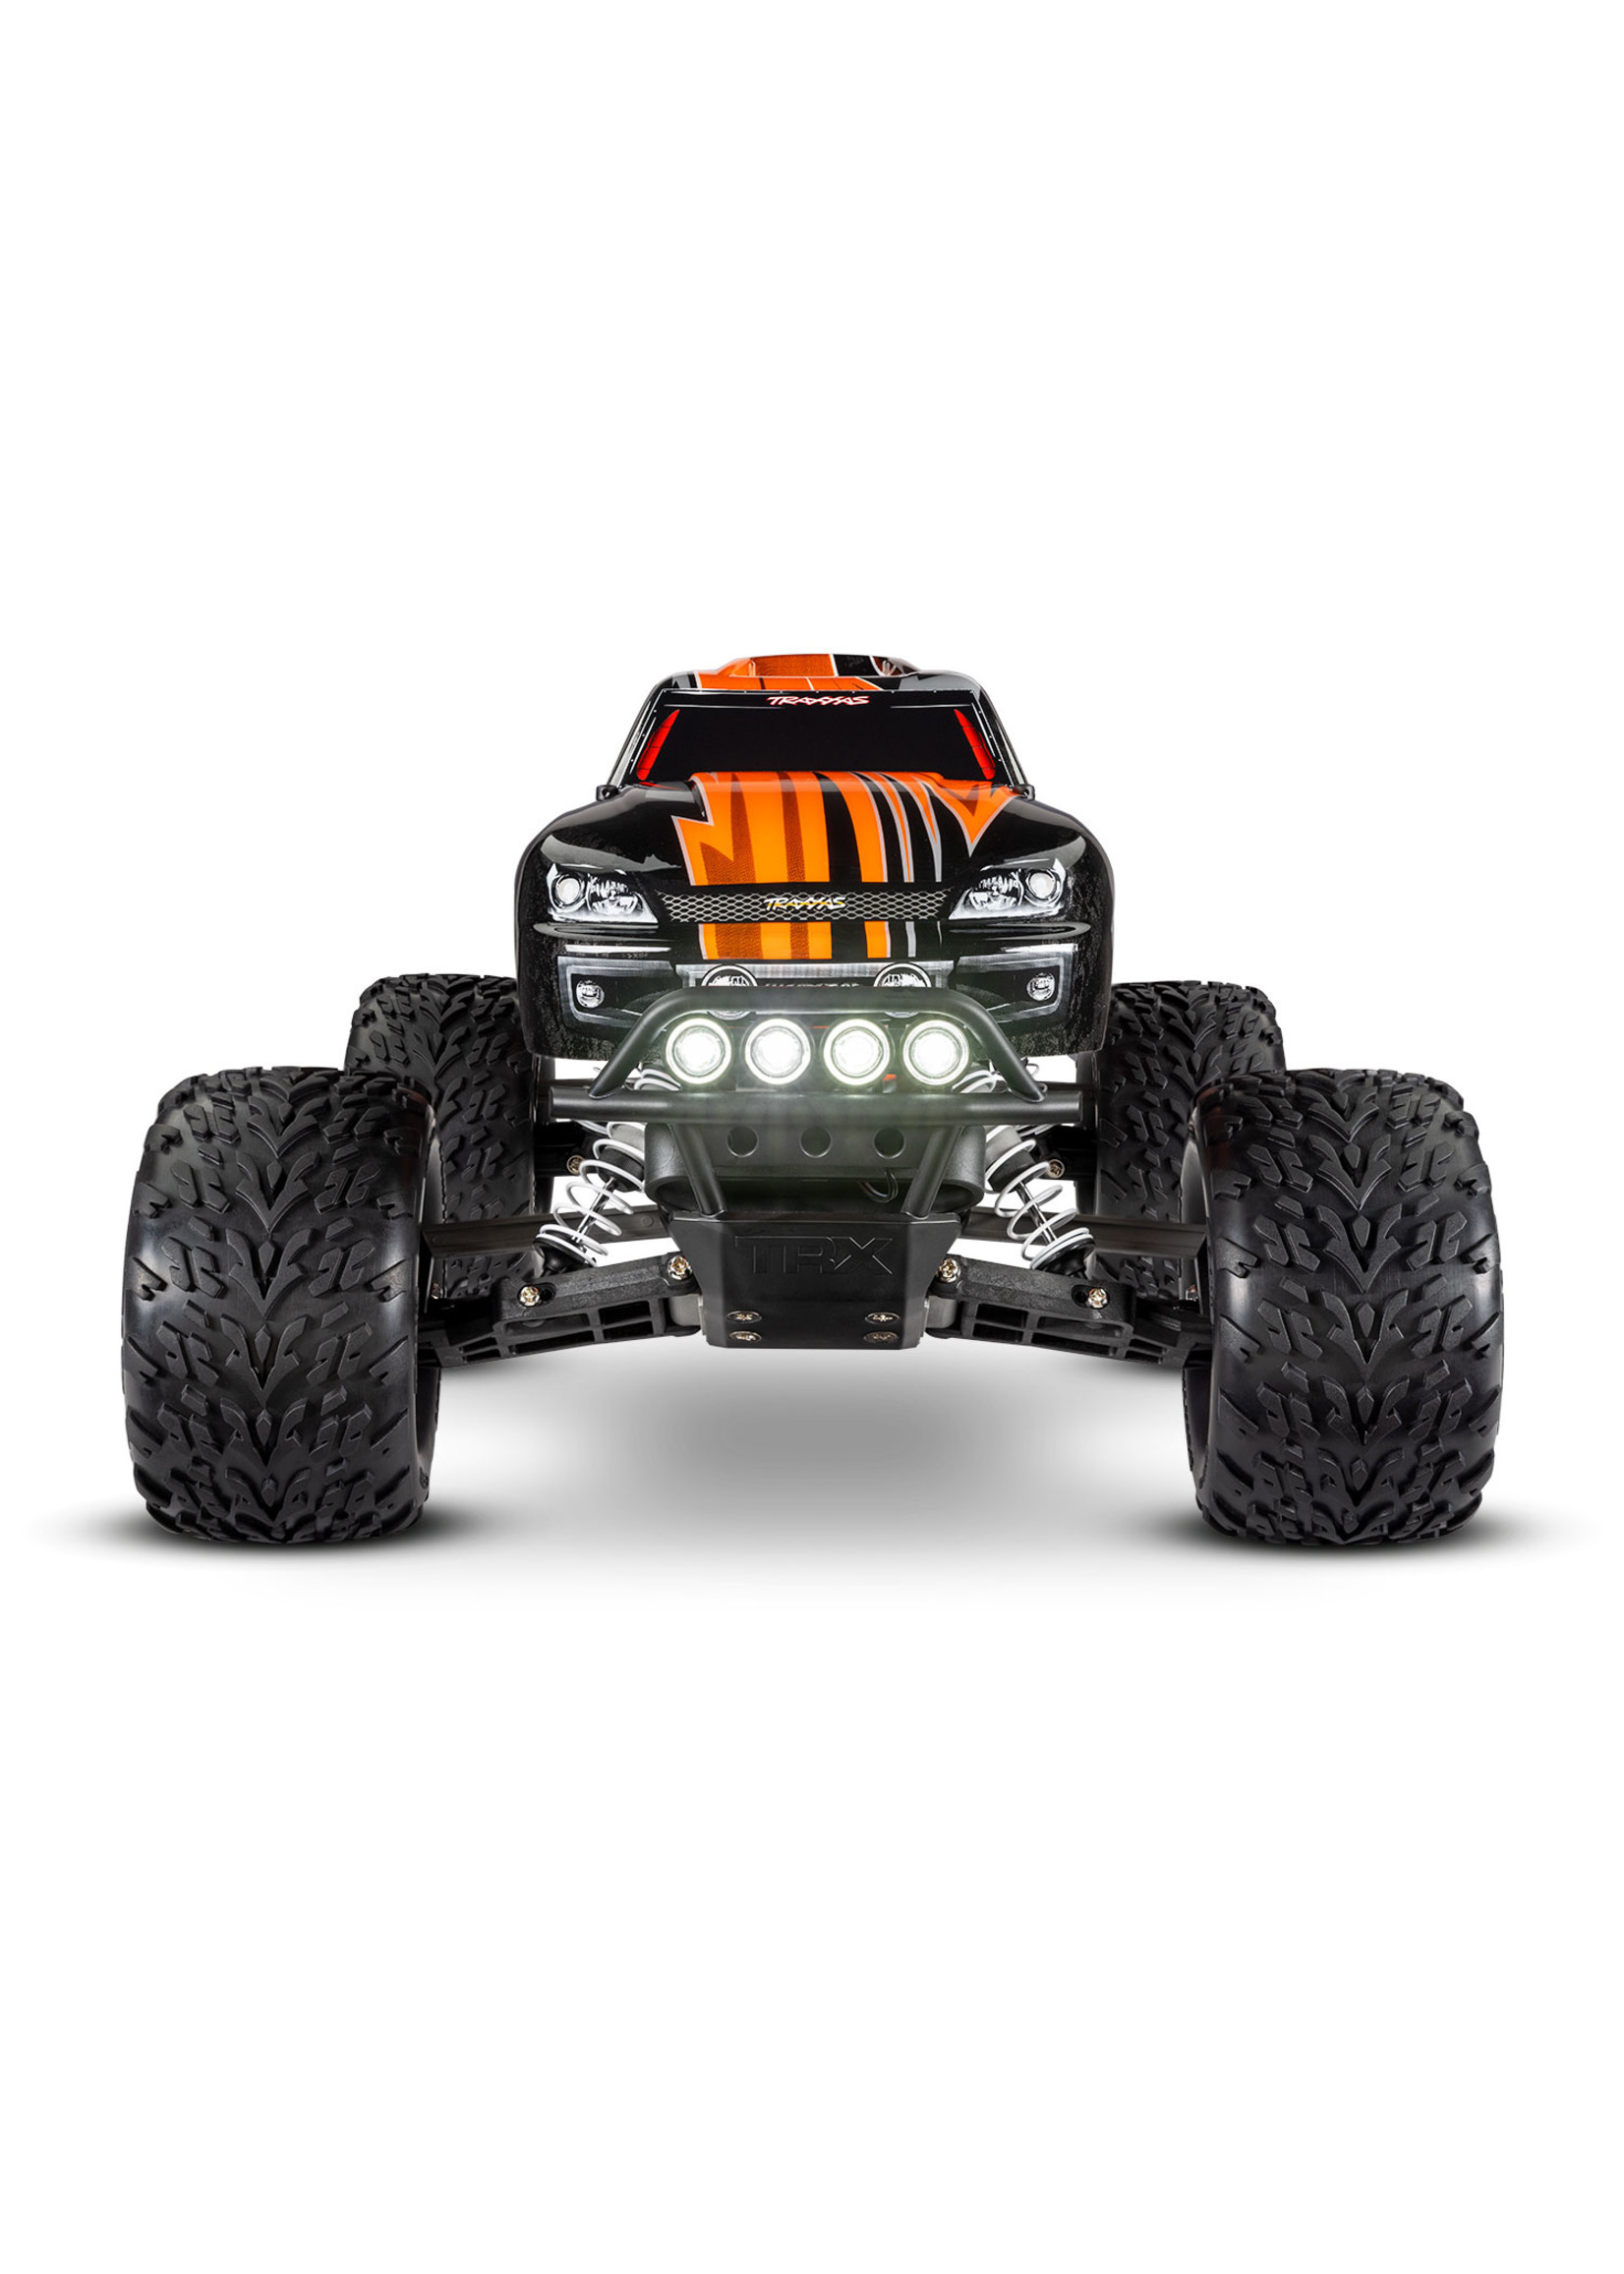 Traxxas 1/10 Stampede 2WD RTR Monster Truck with Lights - Orange